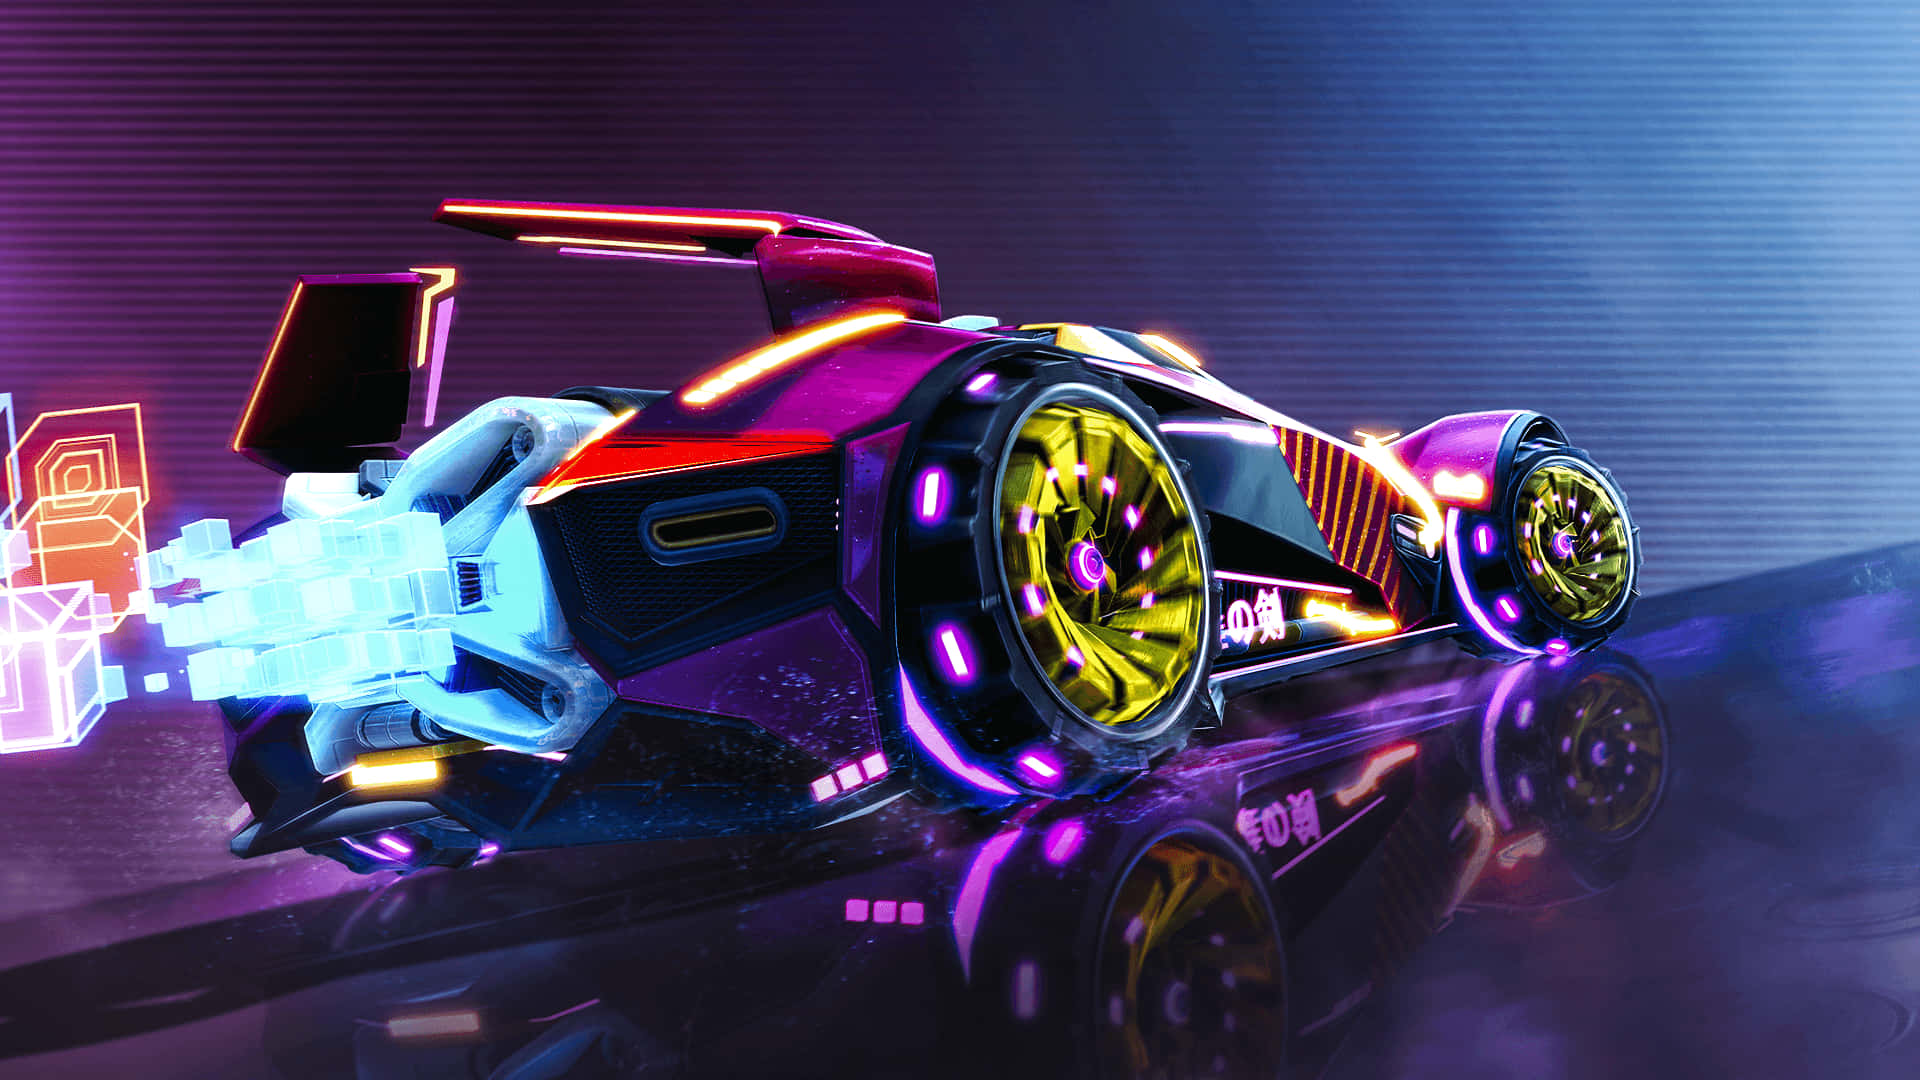 • Fly through the air in Rocket League's thrilling game of scrotum up car football.